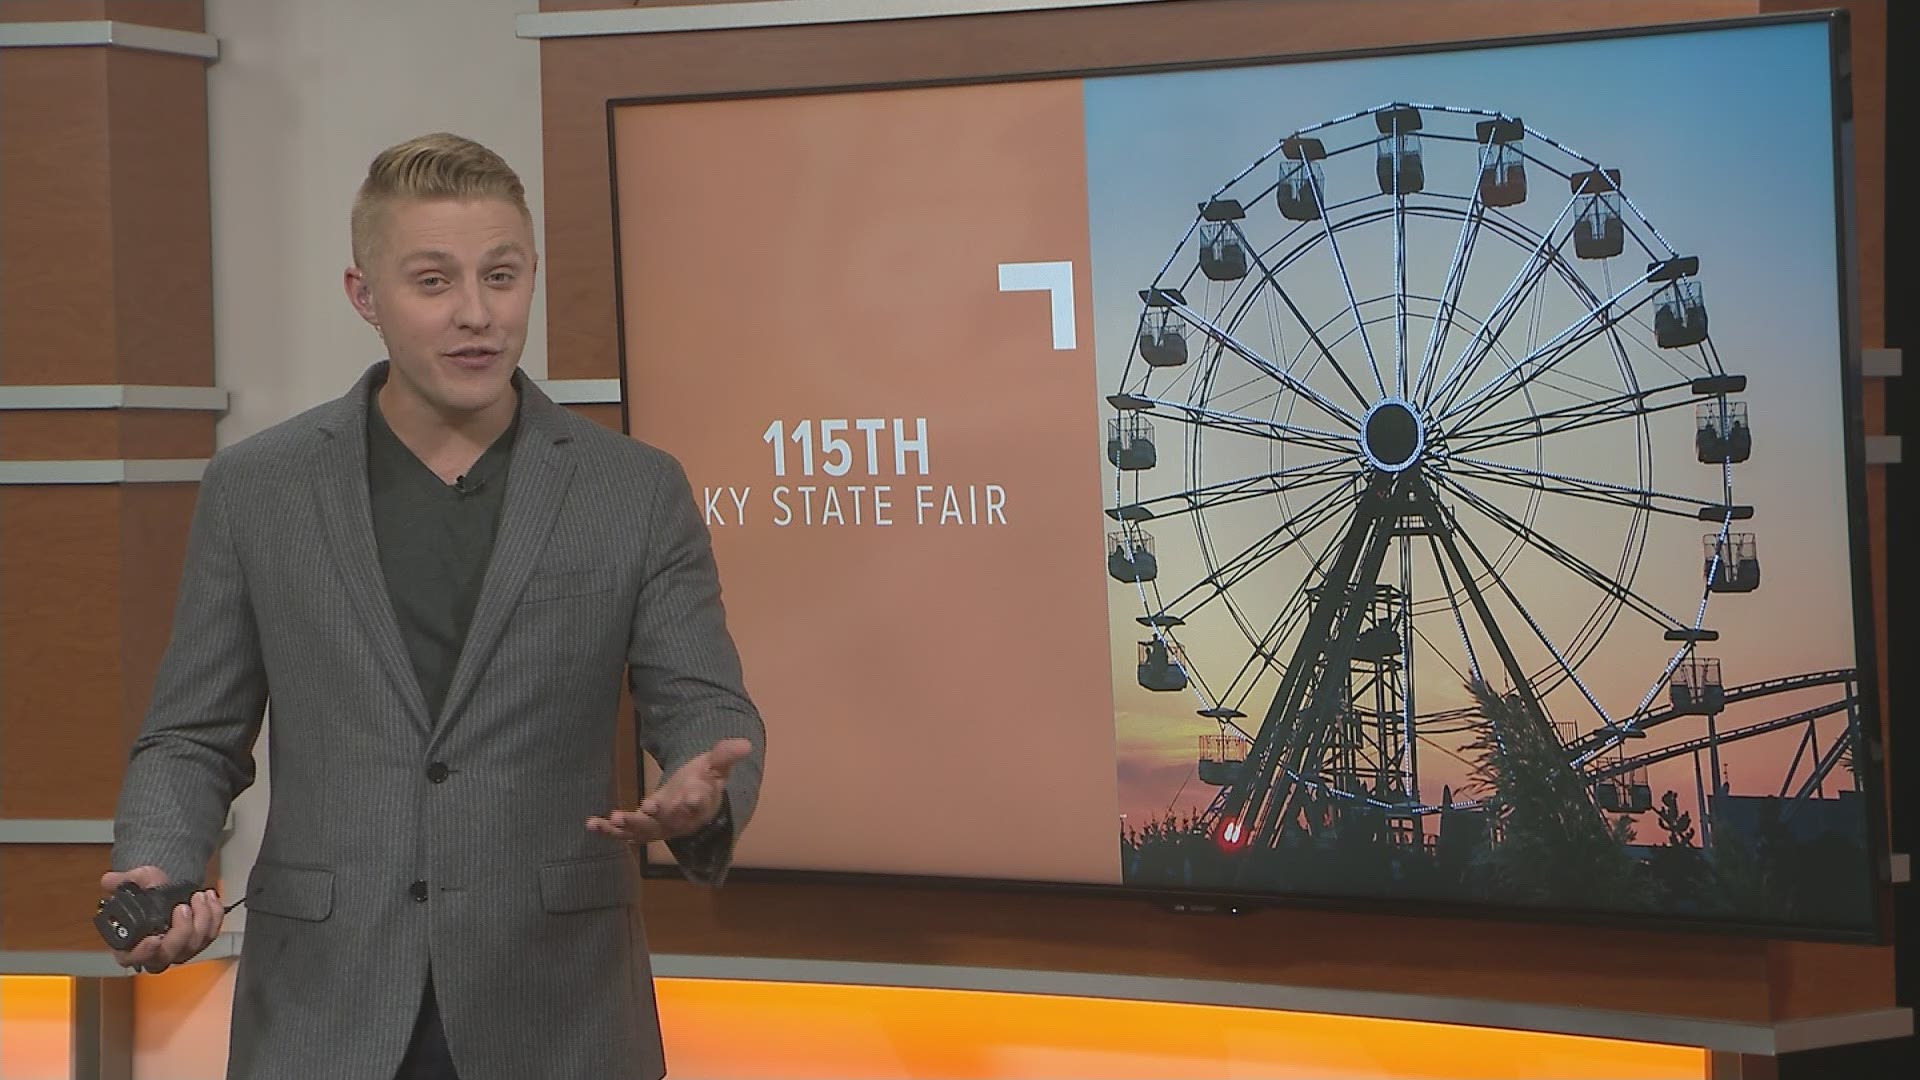 In 117 years, we've only had 115 state fairs - what gives? As we dug through the archives, we found out that wars and state fairs don't mix well.